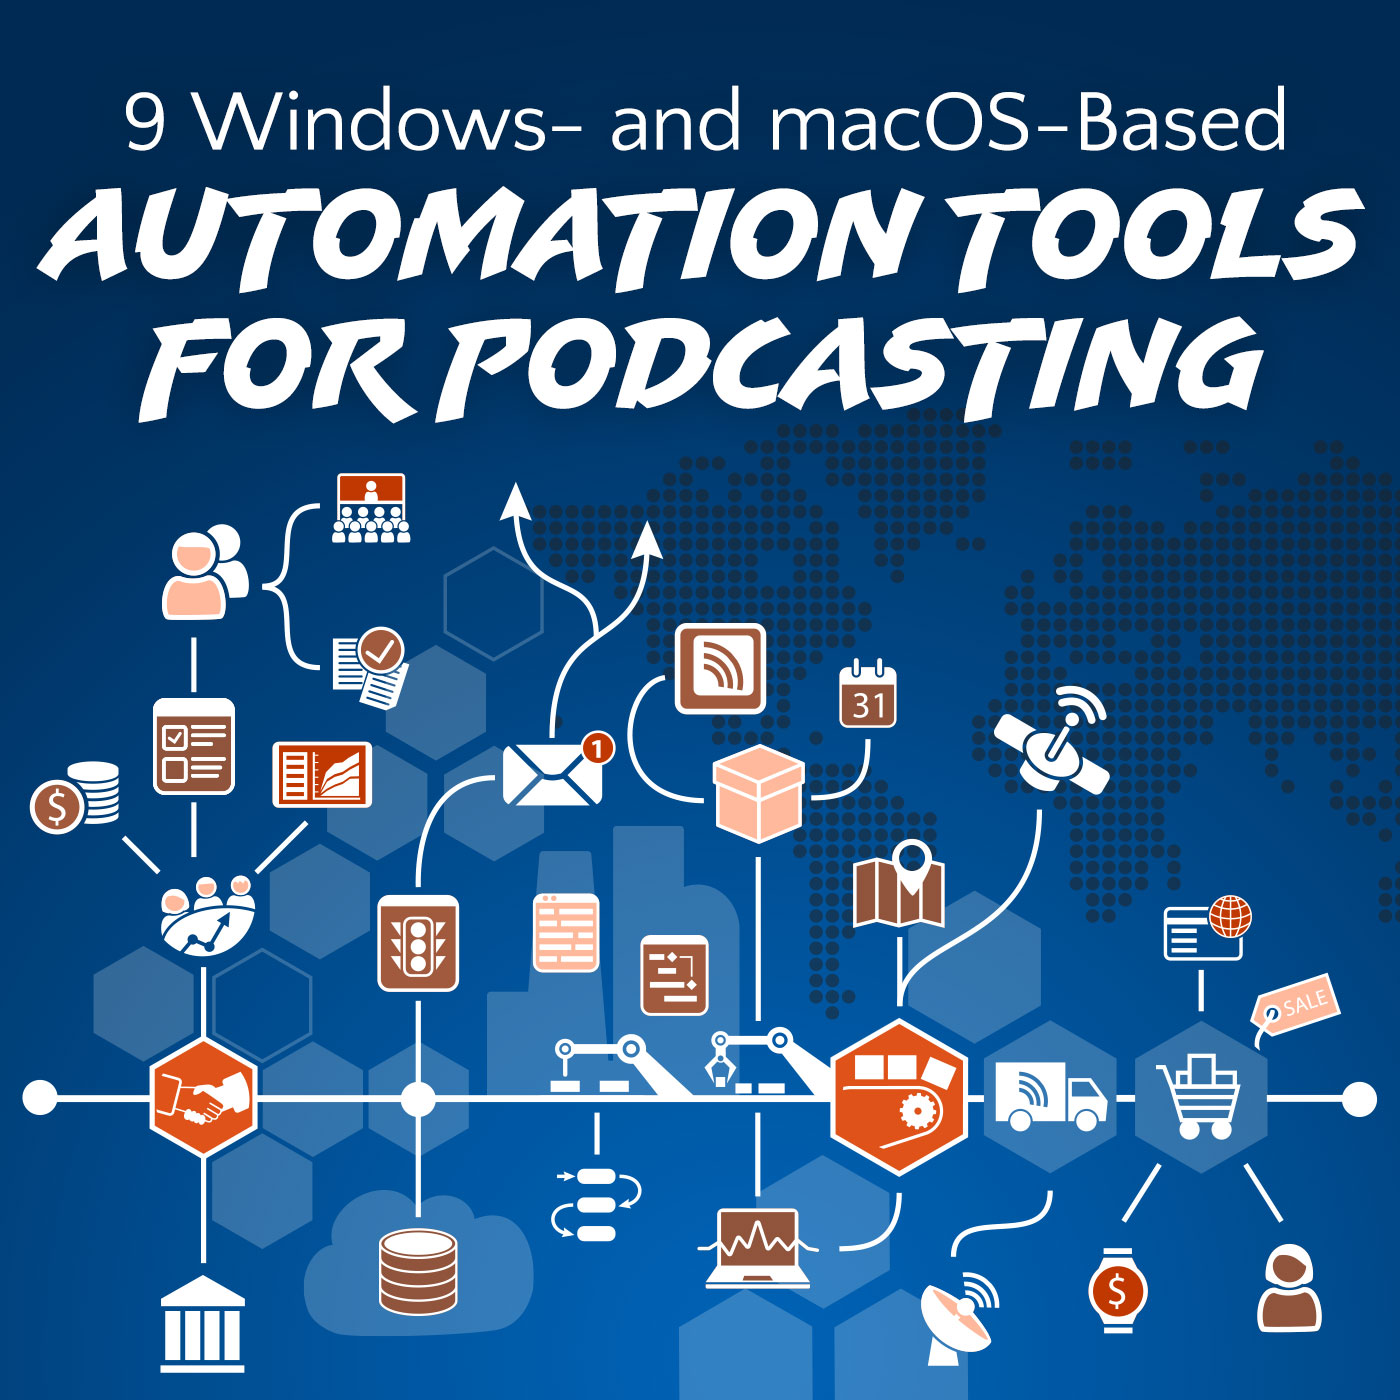 9 Windows- and macOS-Based Automation Tools for Podcasting